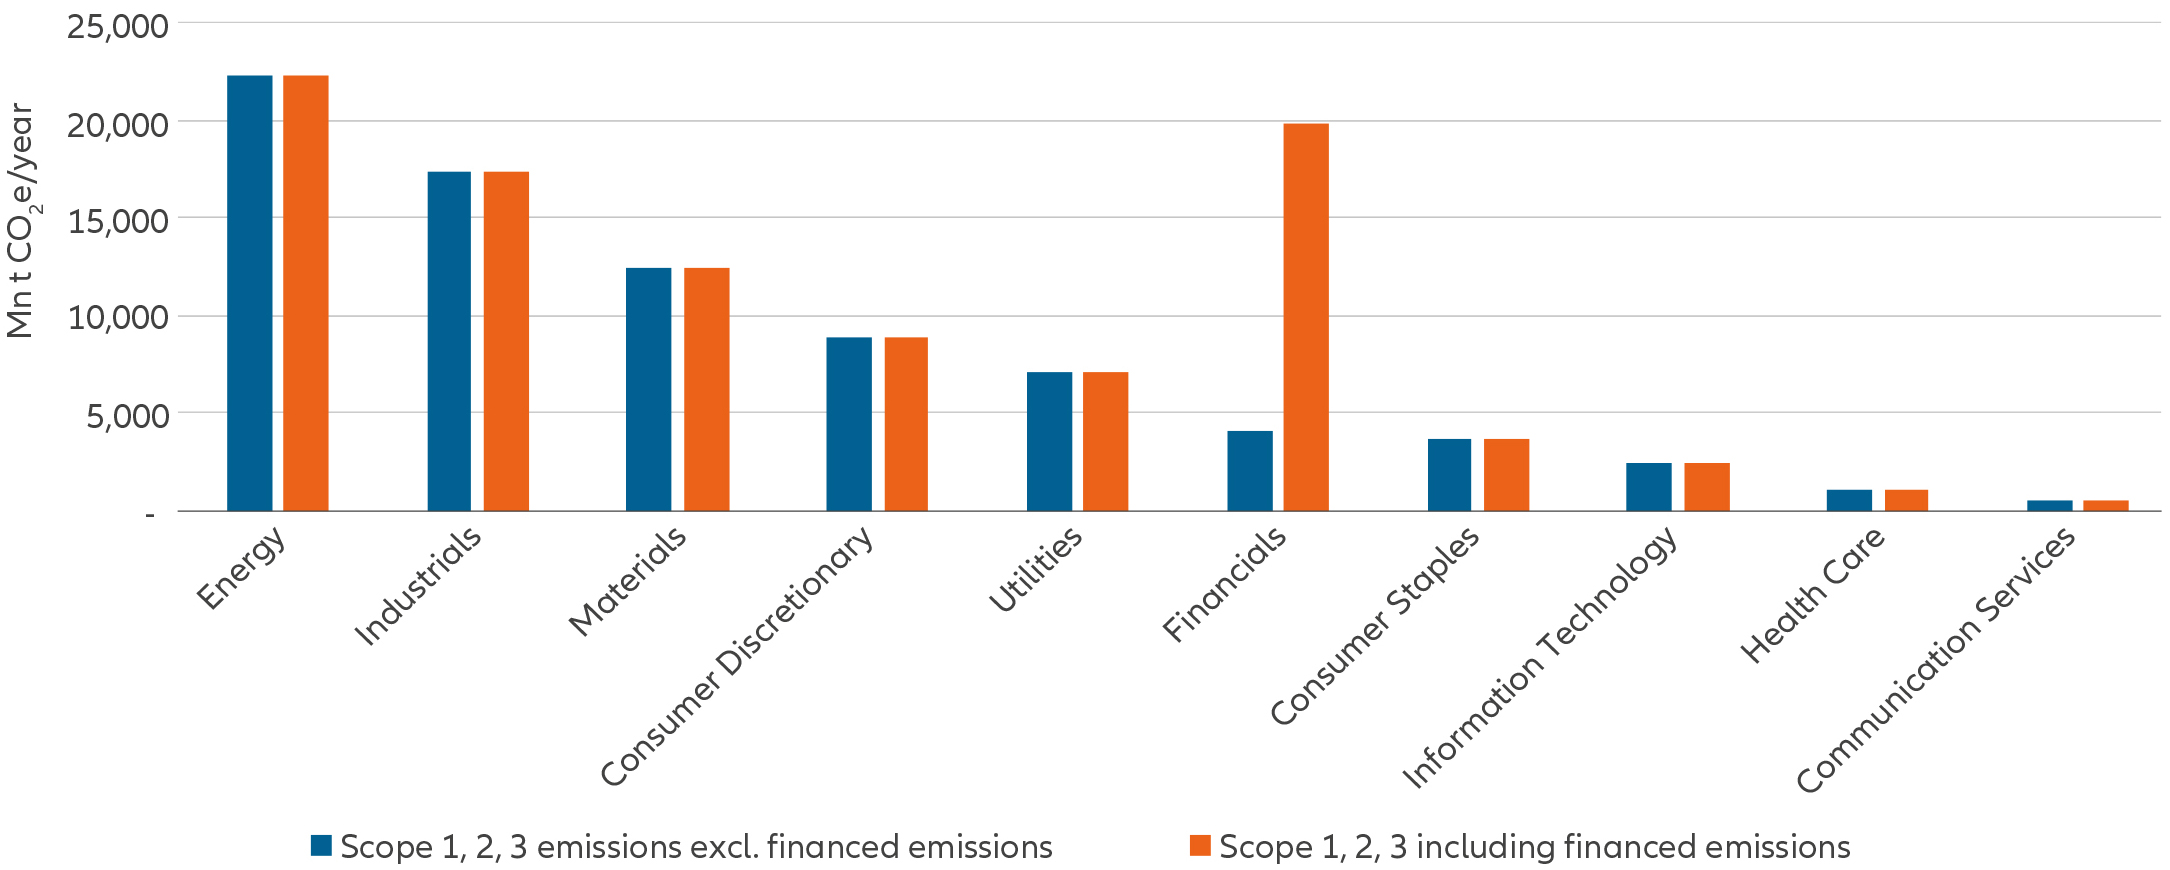 Exhibit 1: Financed emissions reveal the significant relevance of climate change for banks